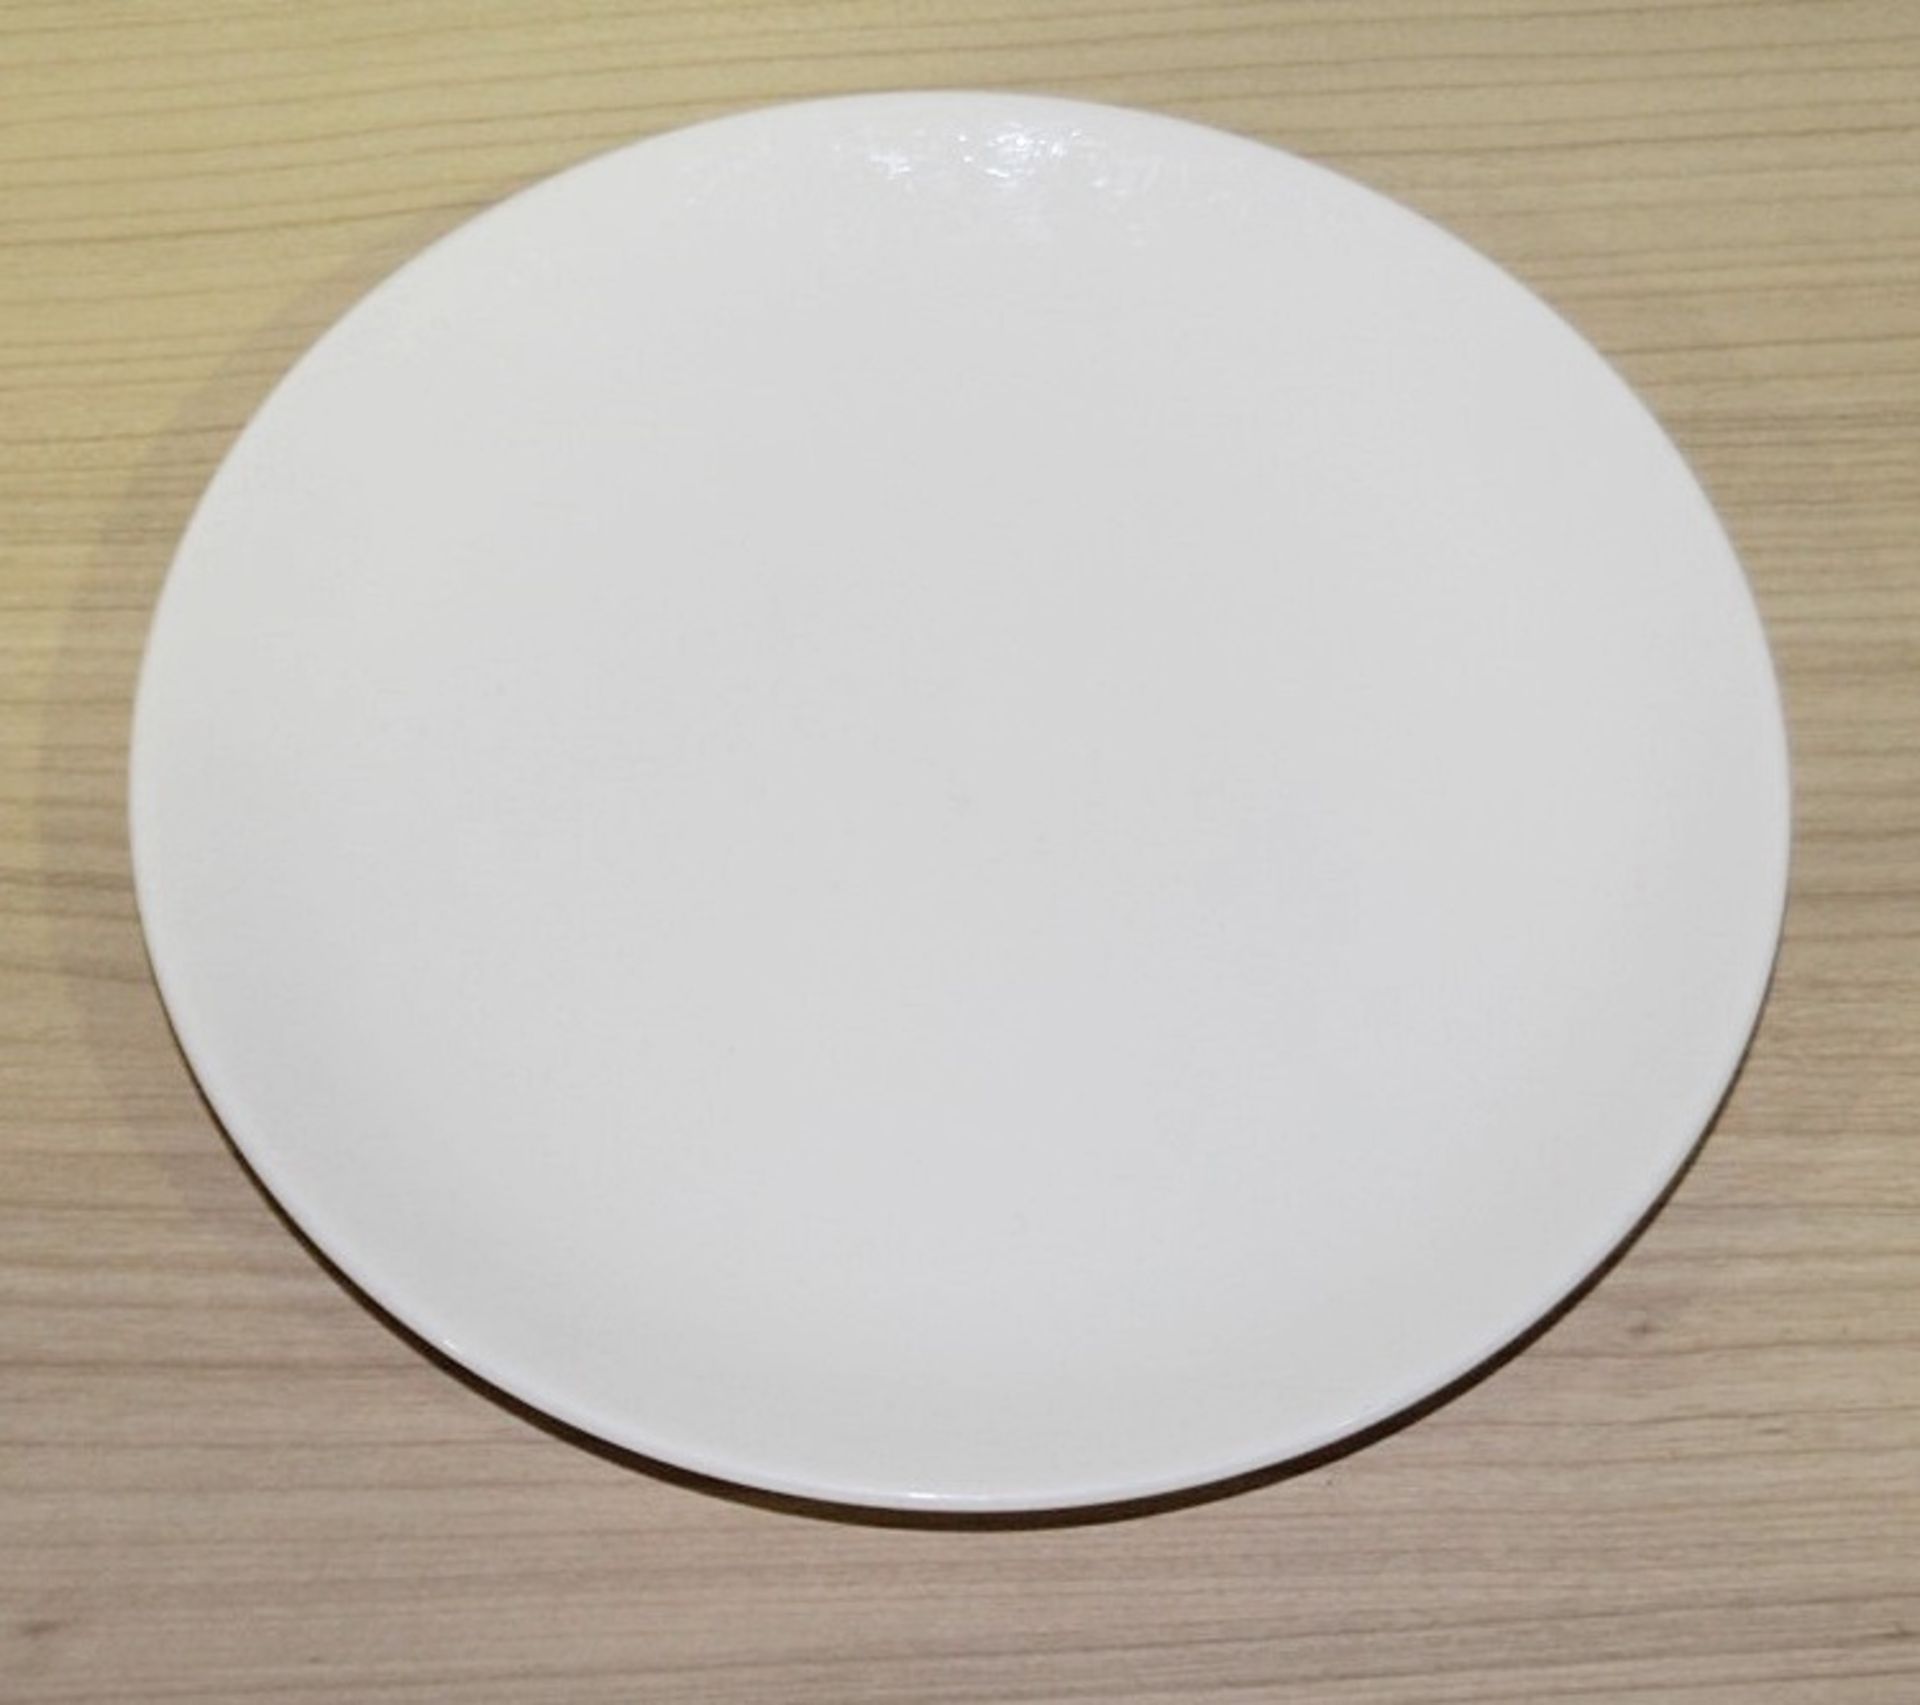 45 x Elia ORIENTIX Fine China Commercial Side / Starter Plates - 21.5cm In Diameter - Image 2 of 5